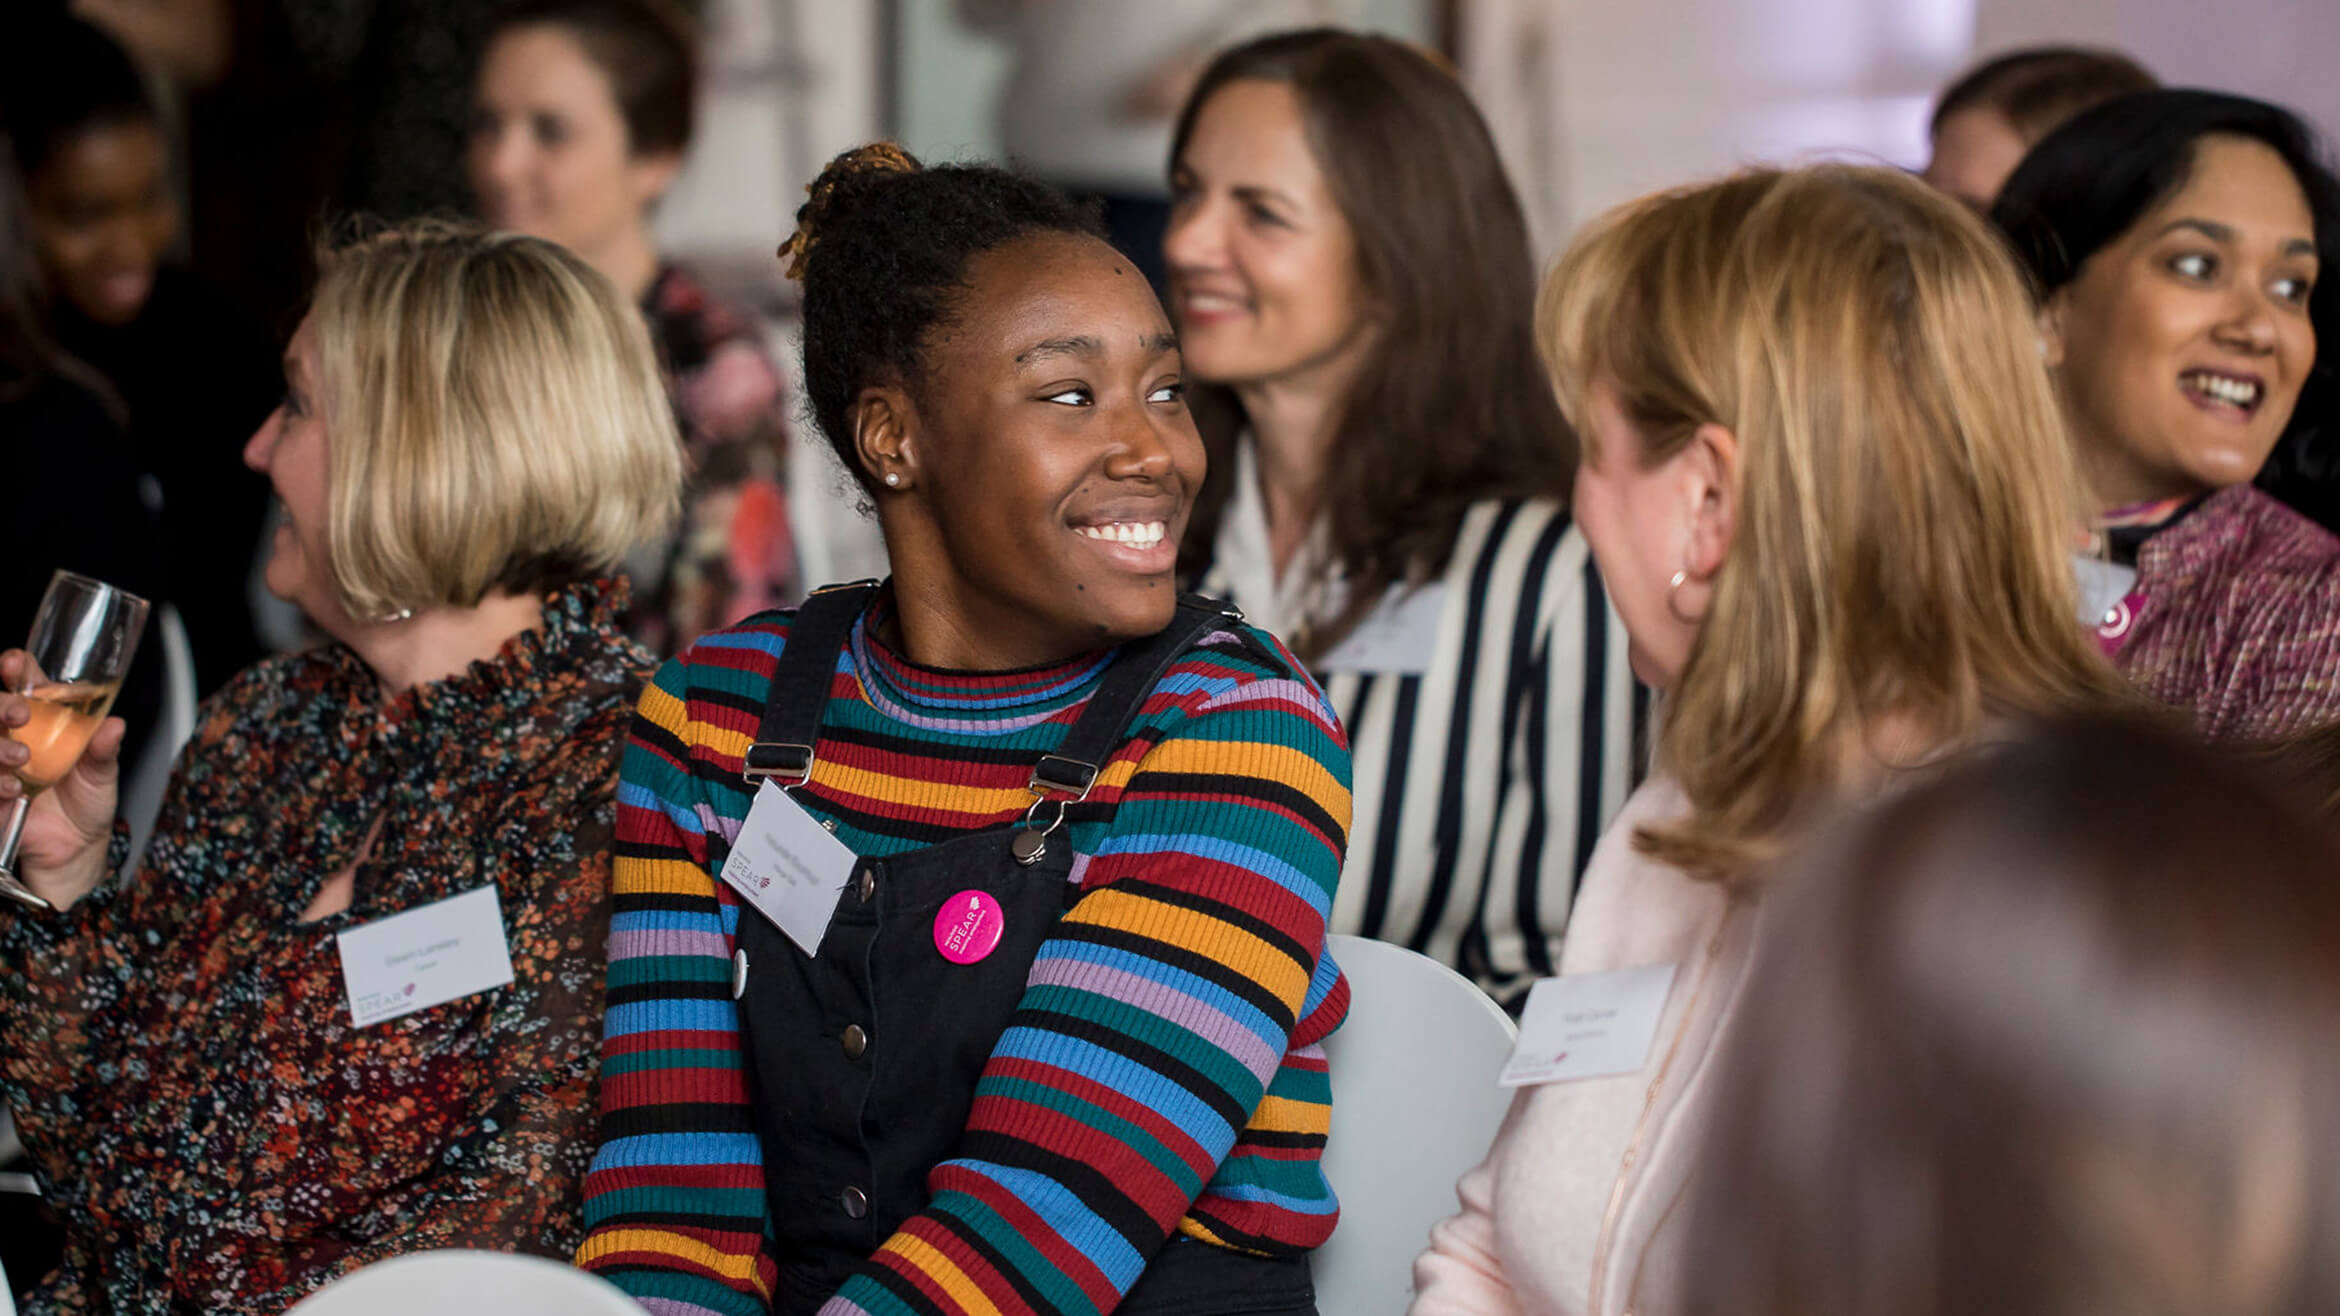 Group of women smiling and chatting at a charity networking event